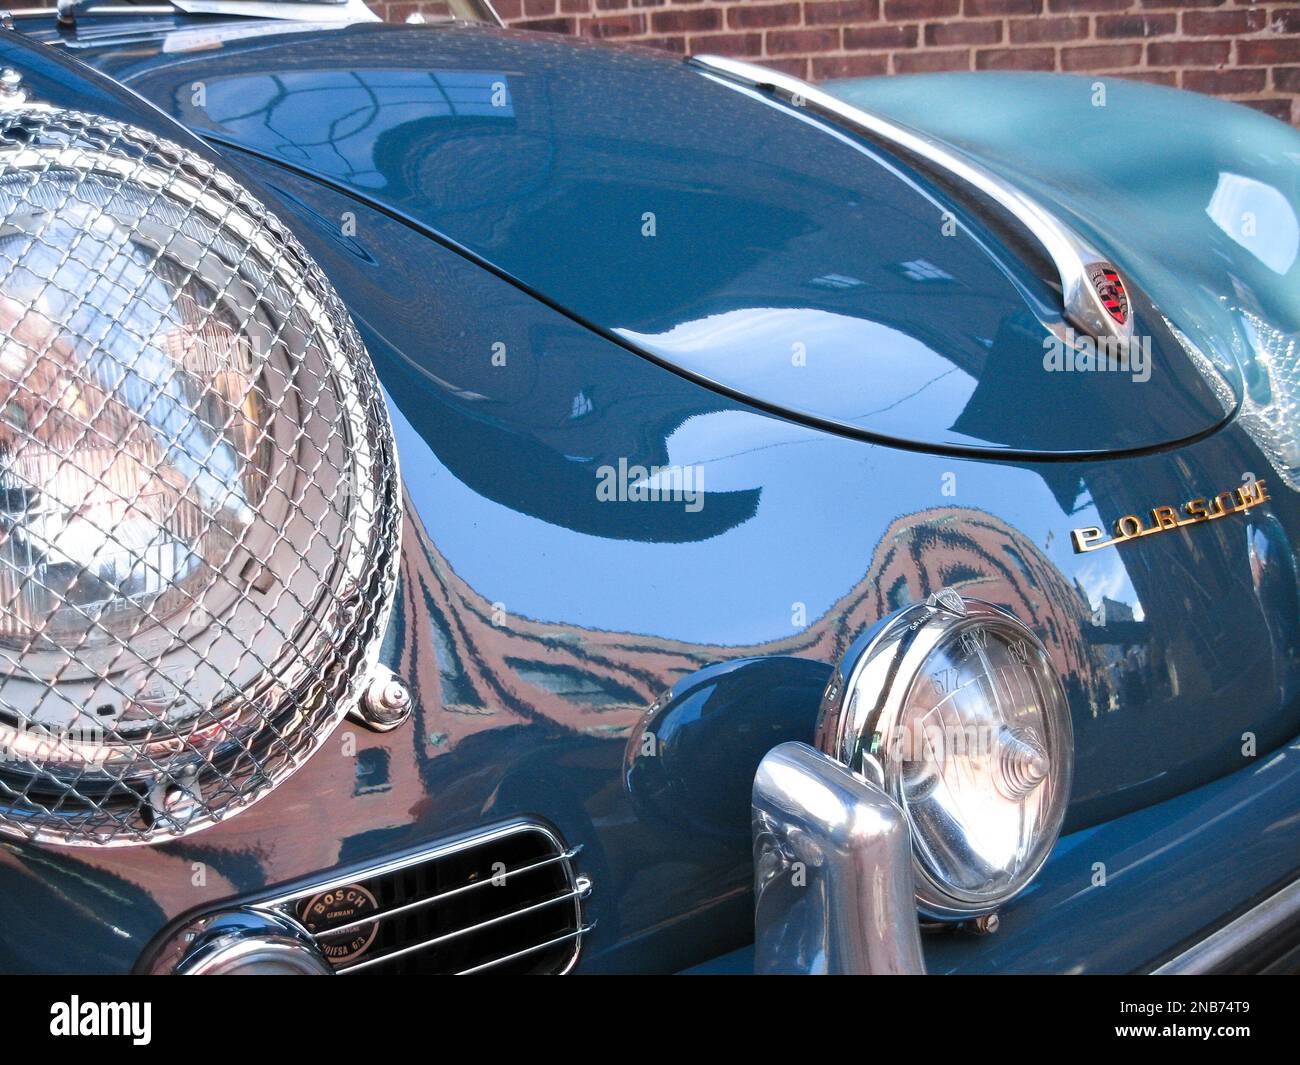 A metal screen attached to the front headlights of a vintage 1957 Porsche 356 Speedster for protection from stone chips and other road hazards Stock Photo